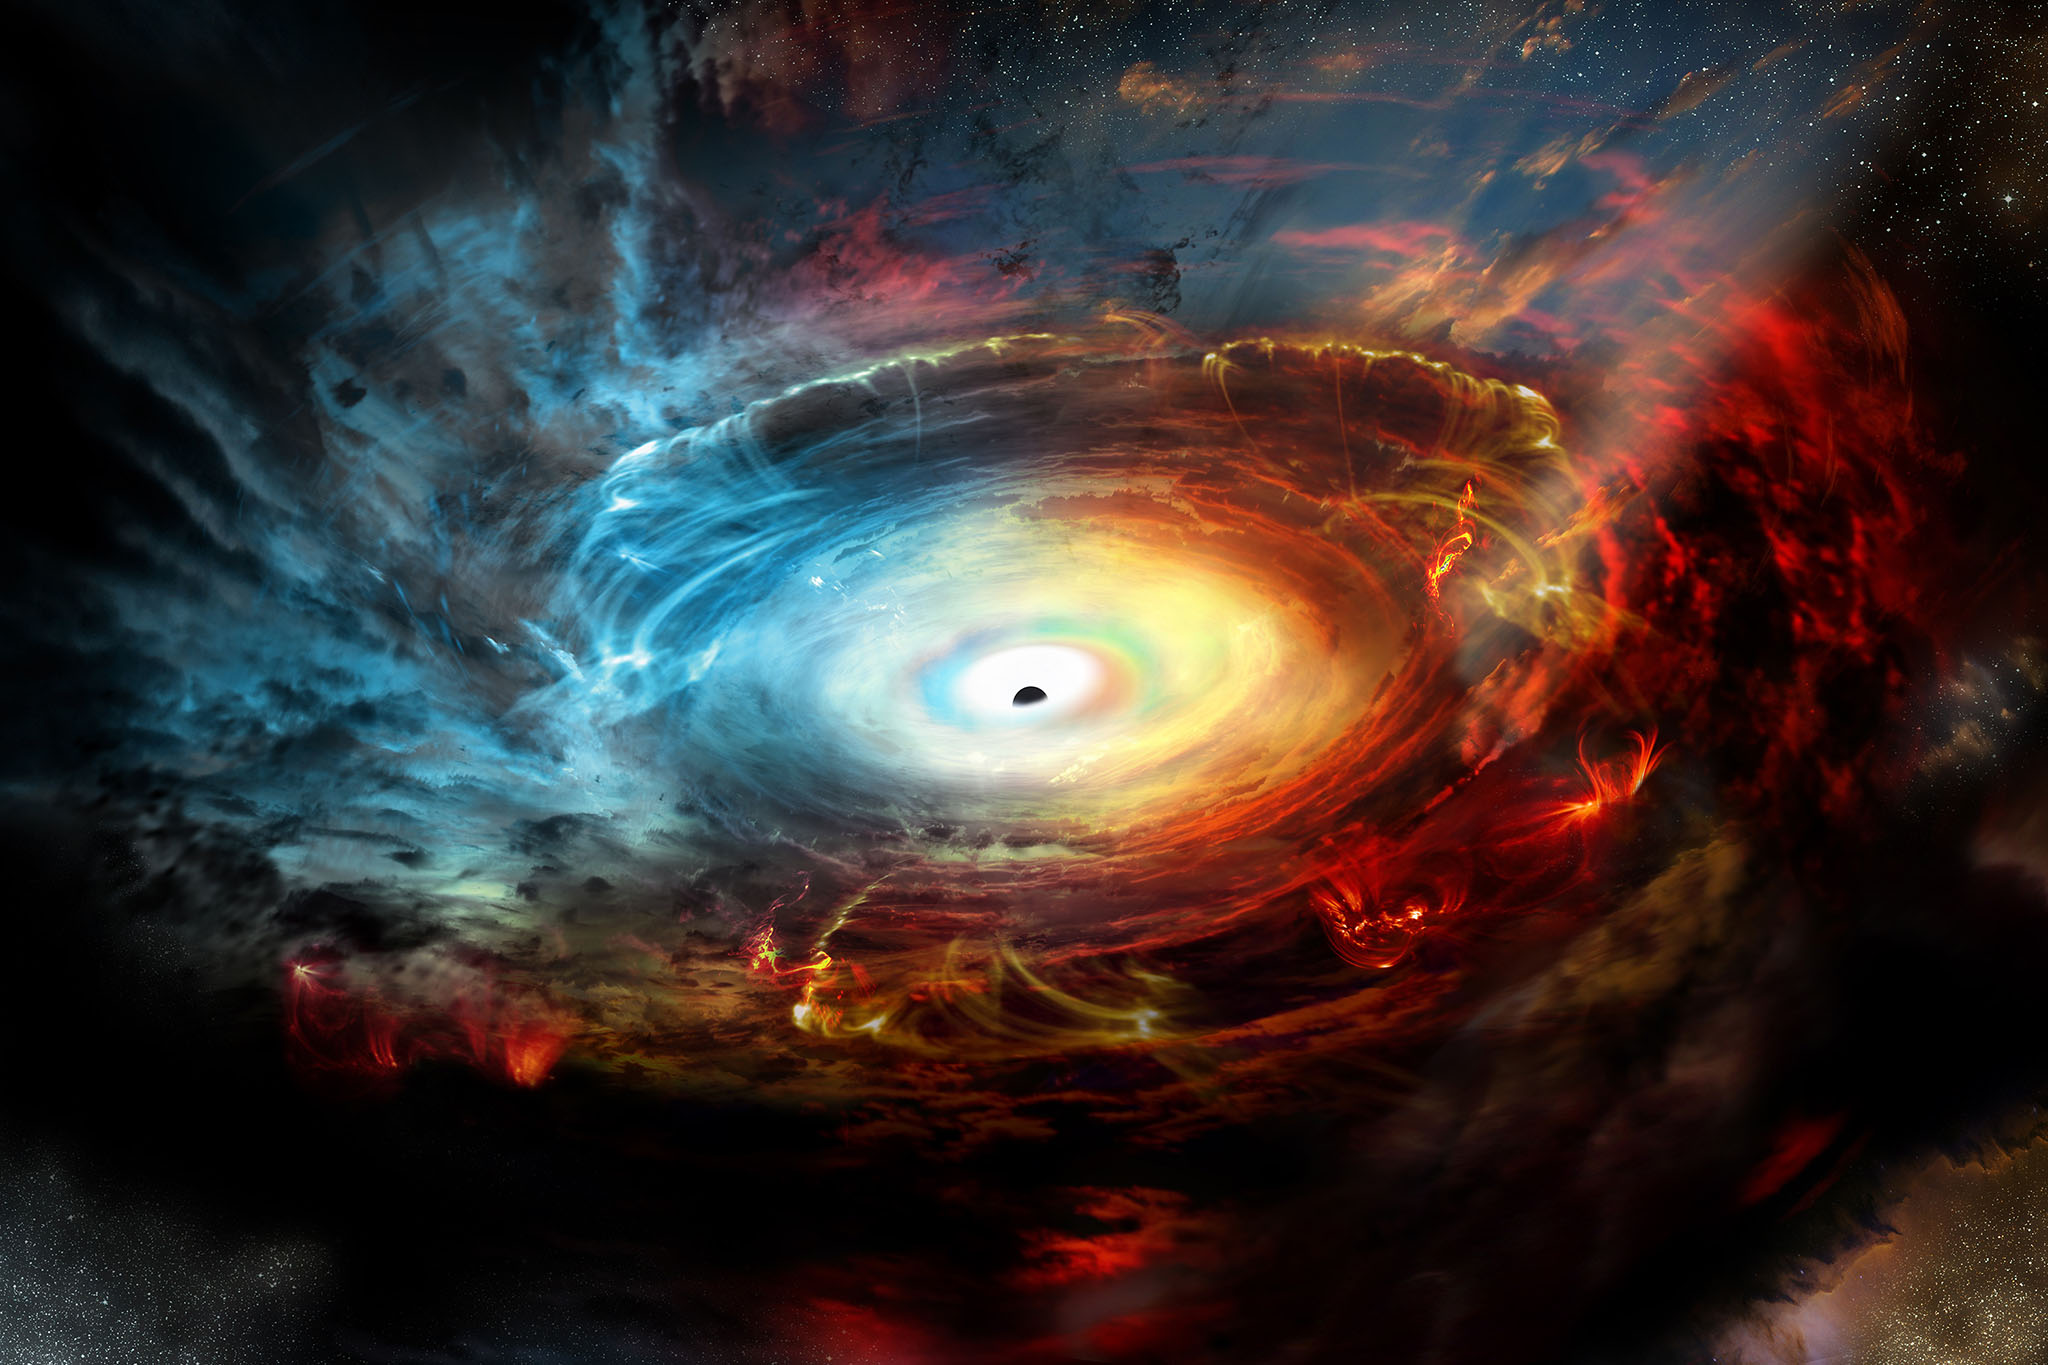 Is matter leave the event horizon during the merger of black holes?